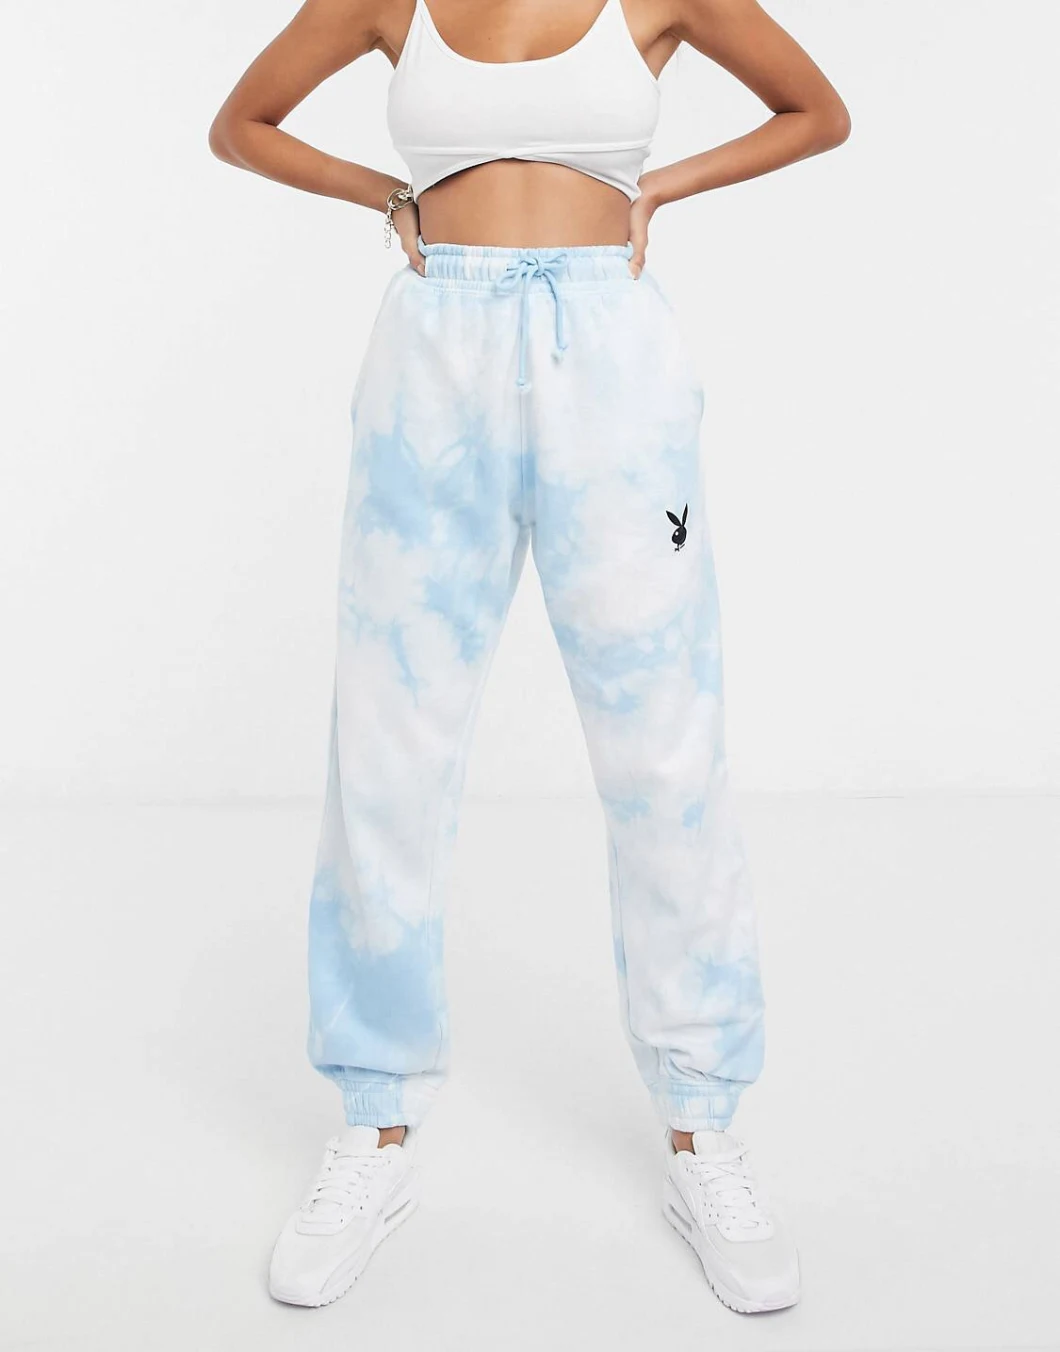 Customize Women Gym Clothing Knitted Jogger Two-Piece Sports Wear in Tie Dye Print